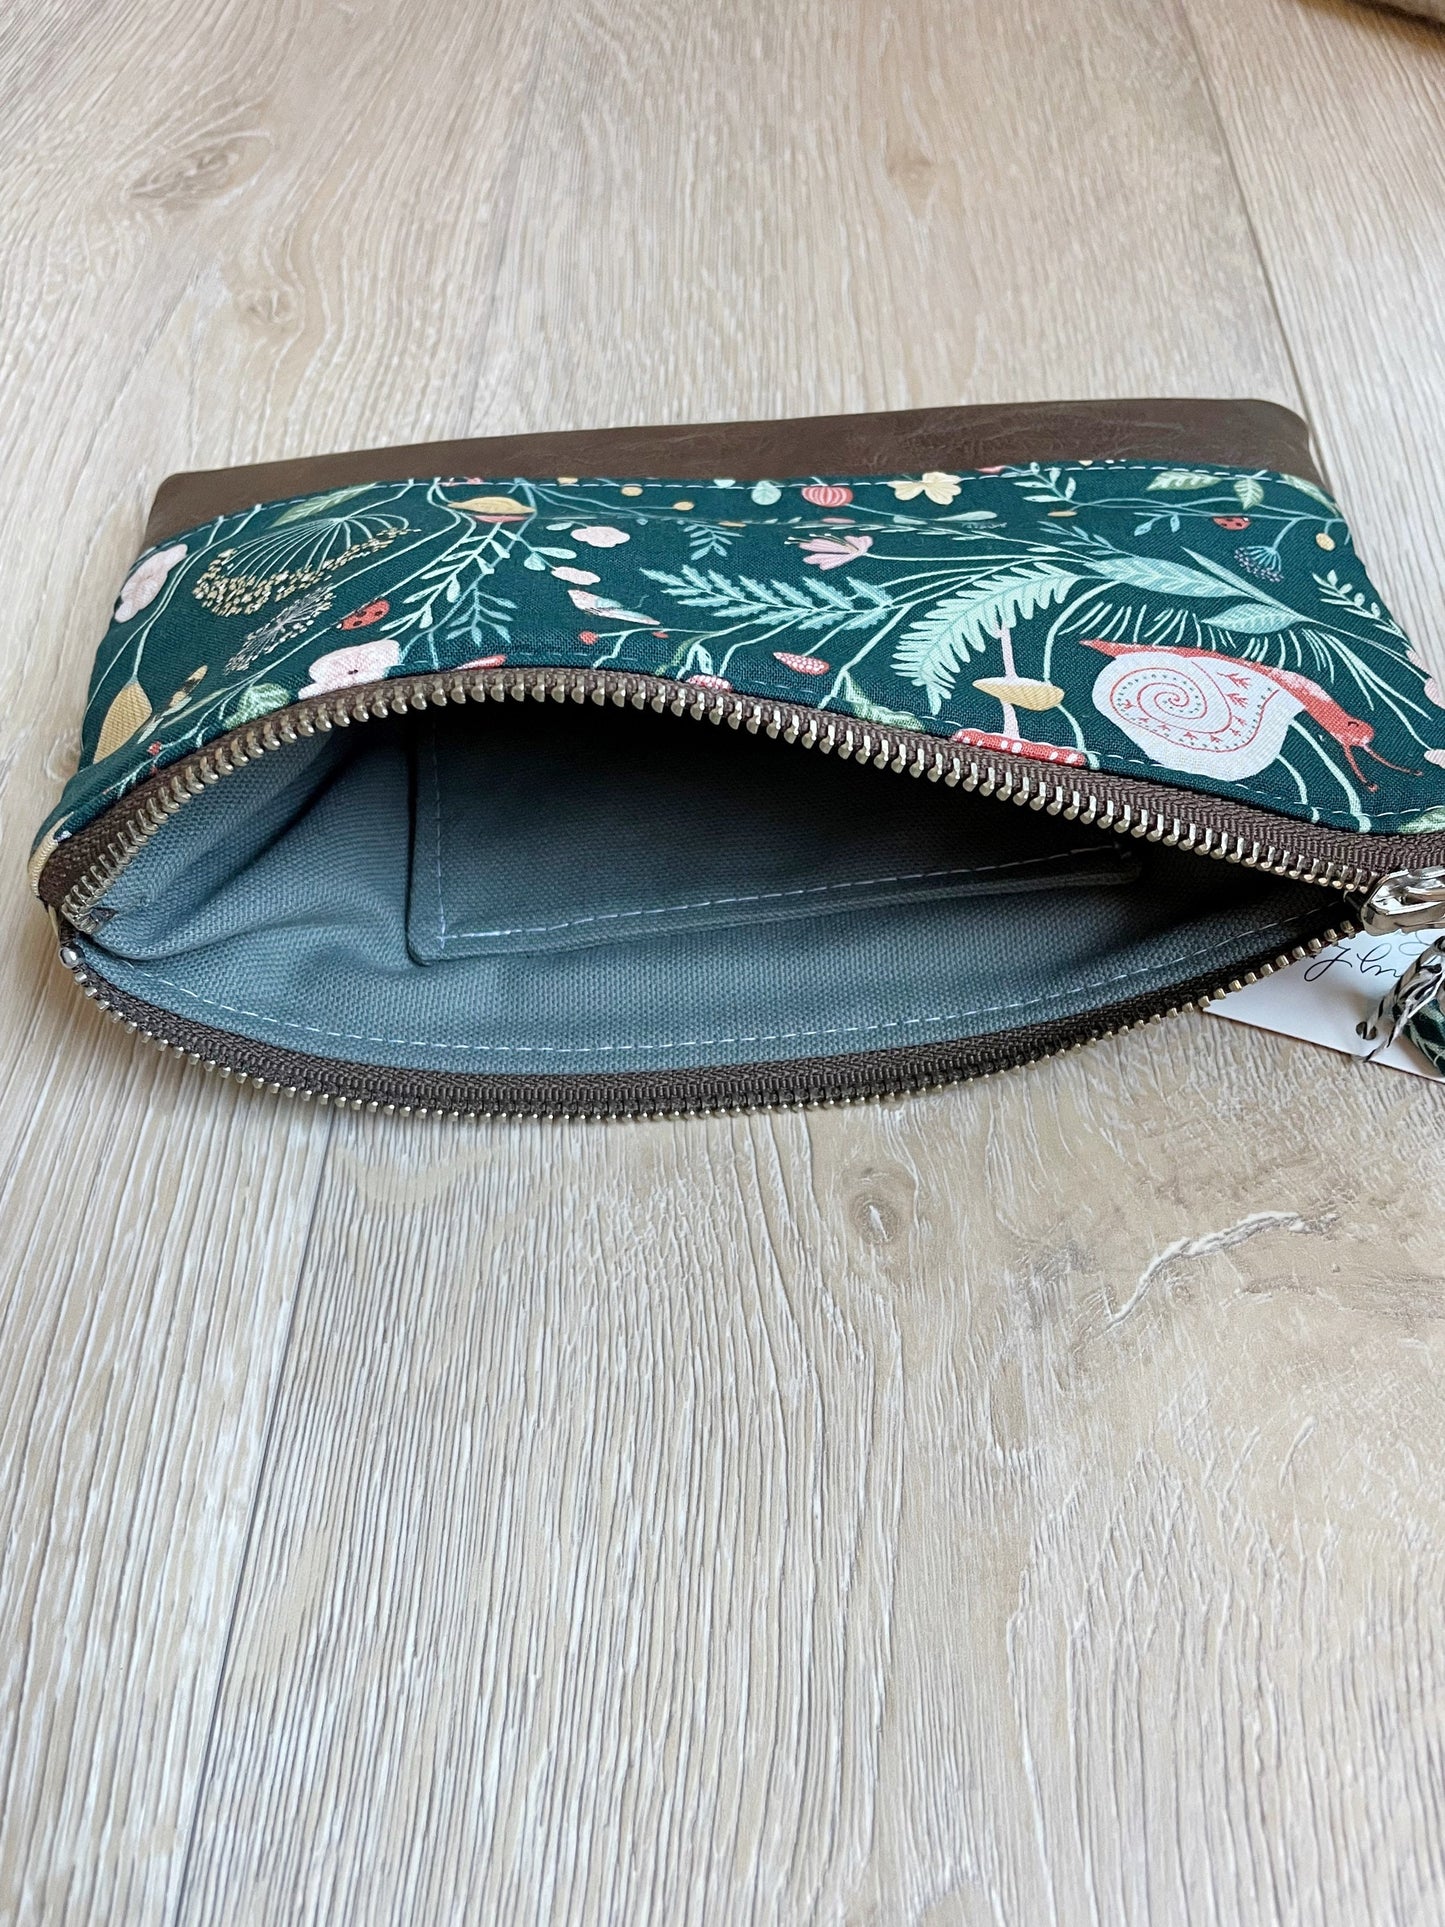 Green forest/nature wristlet